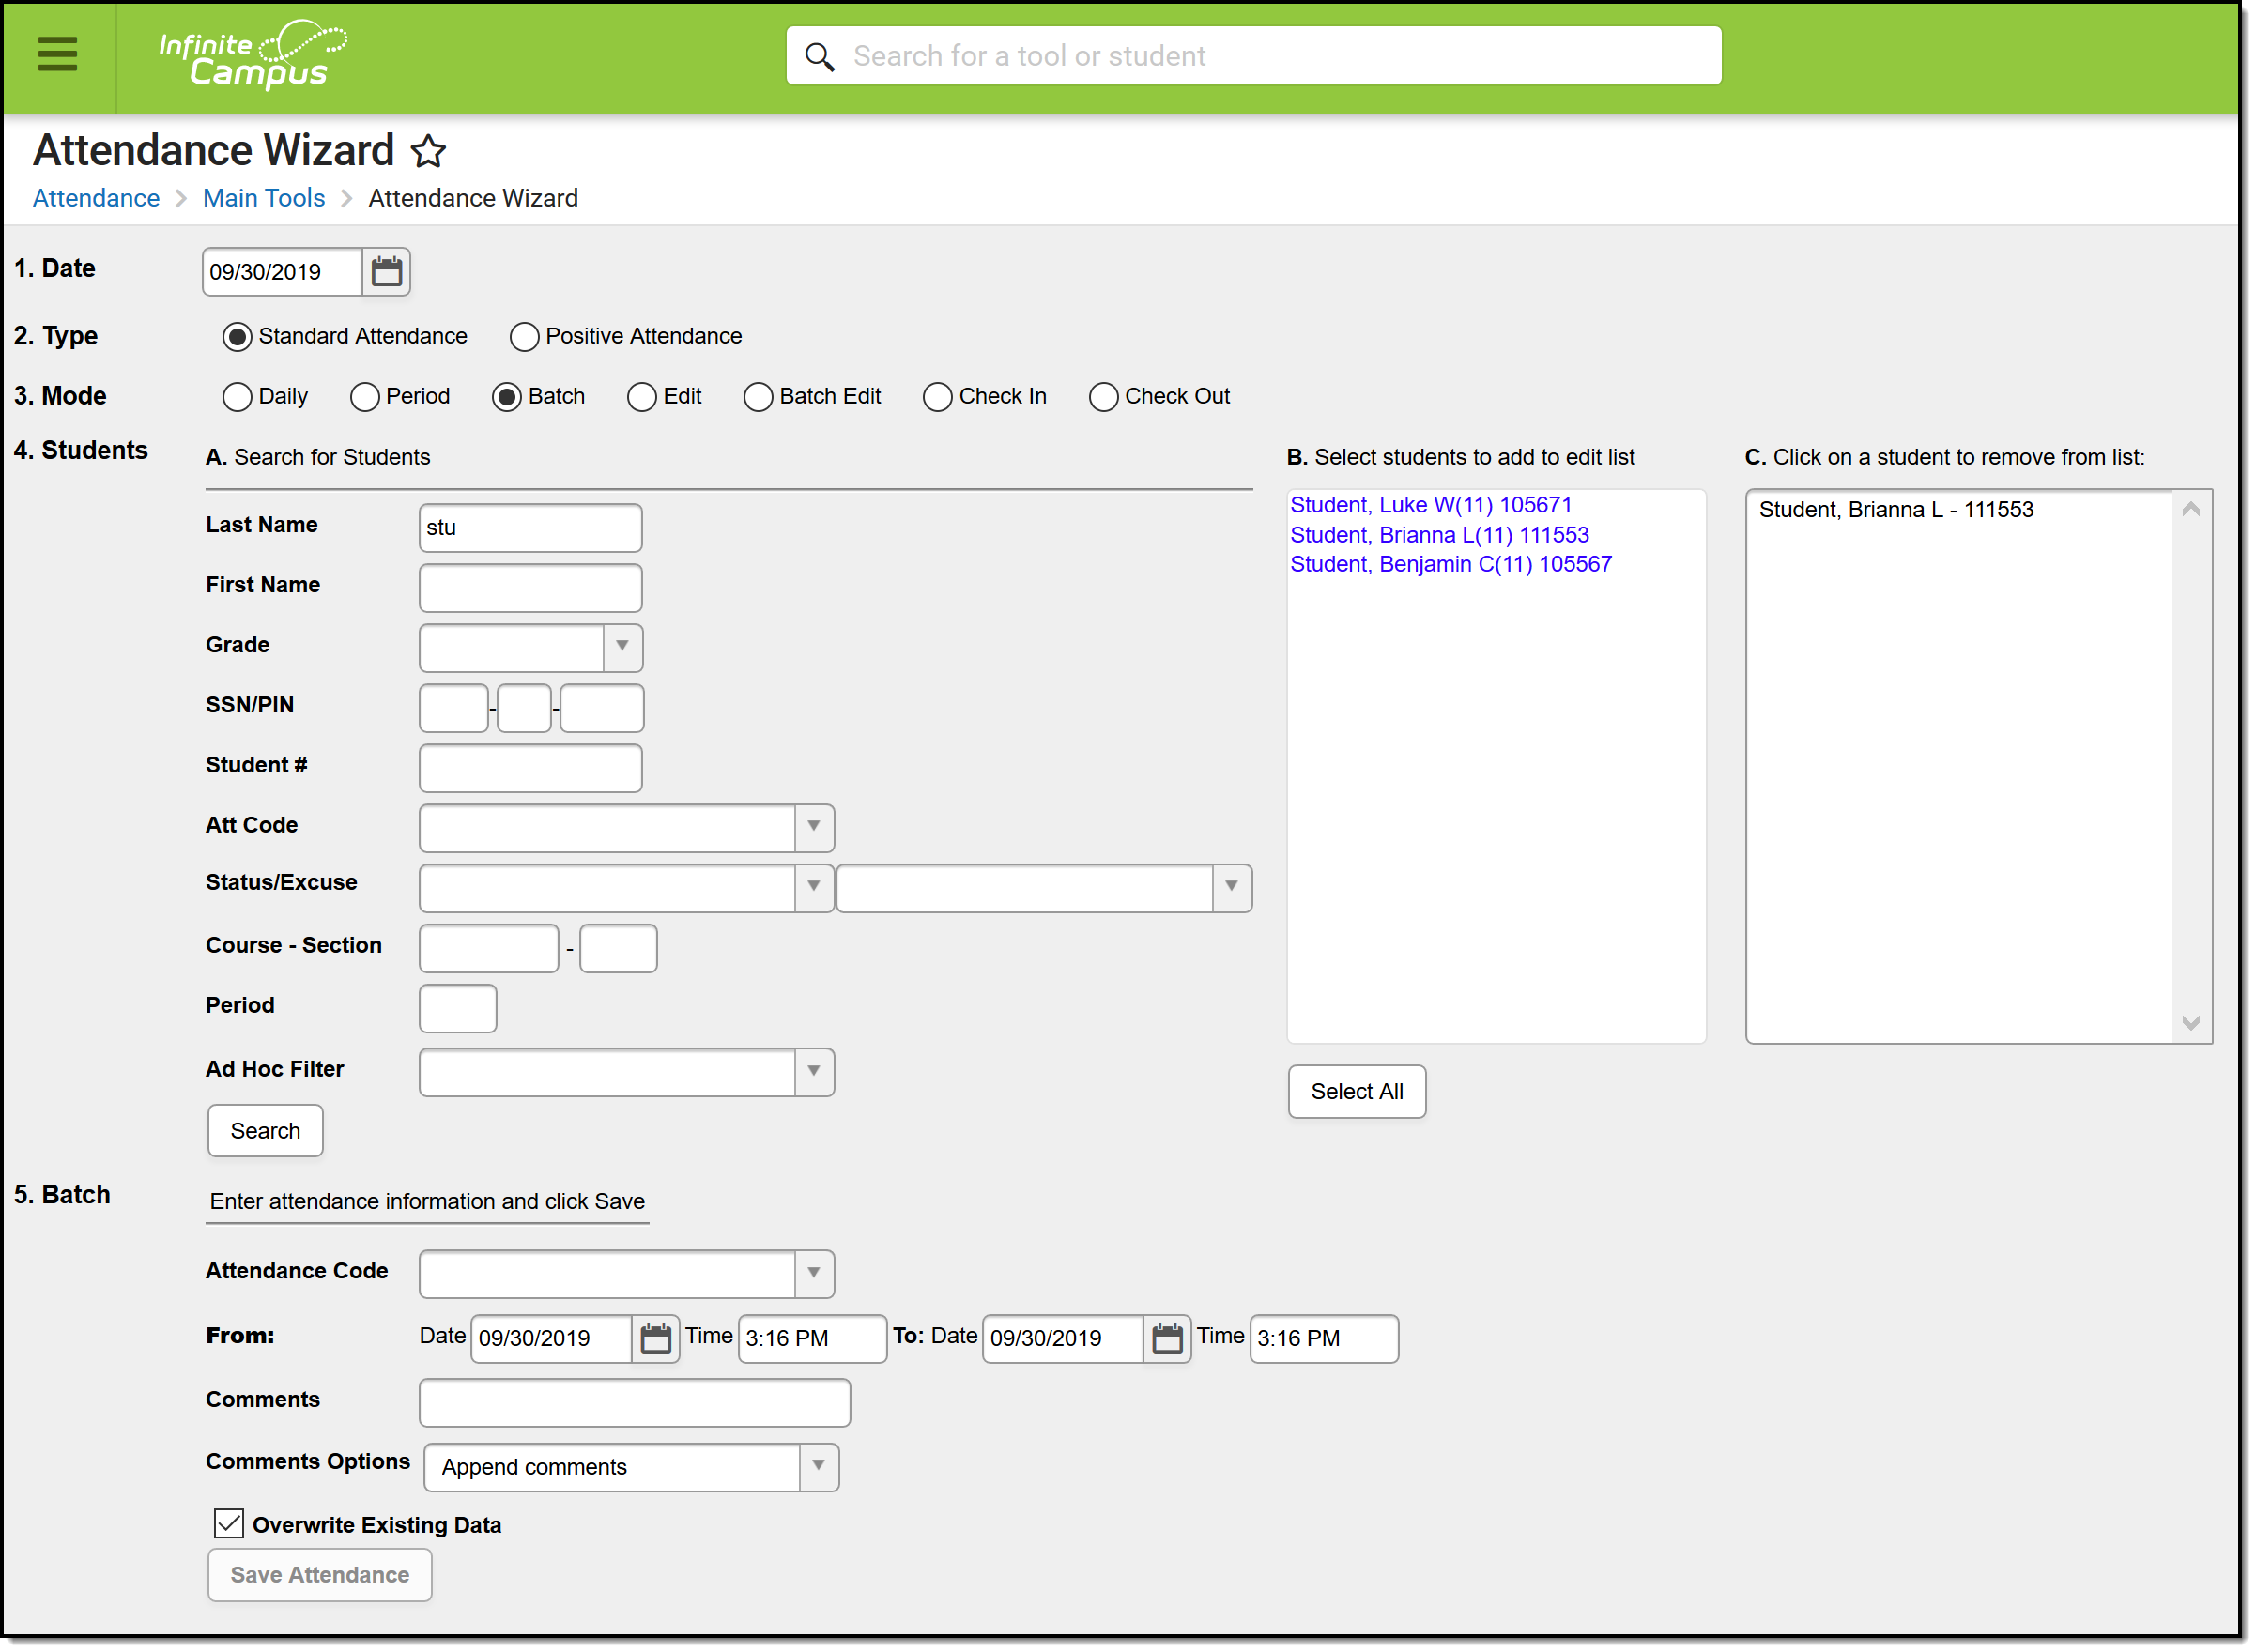 Screenshot of the Batch Mode Options in the Attendance Wizard.